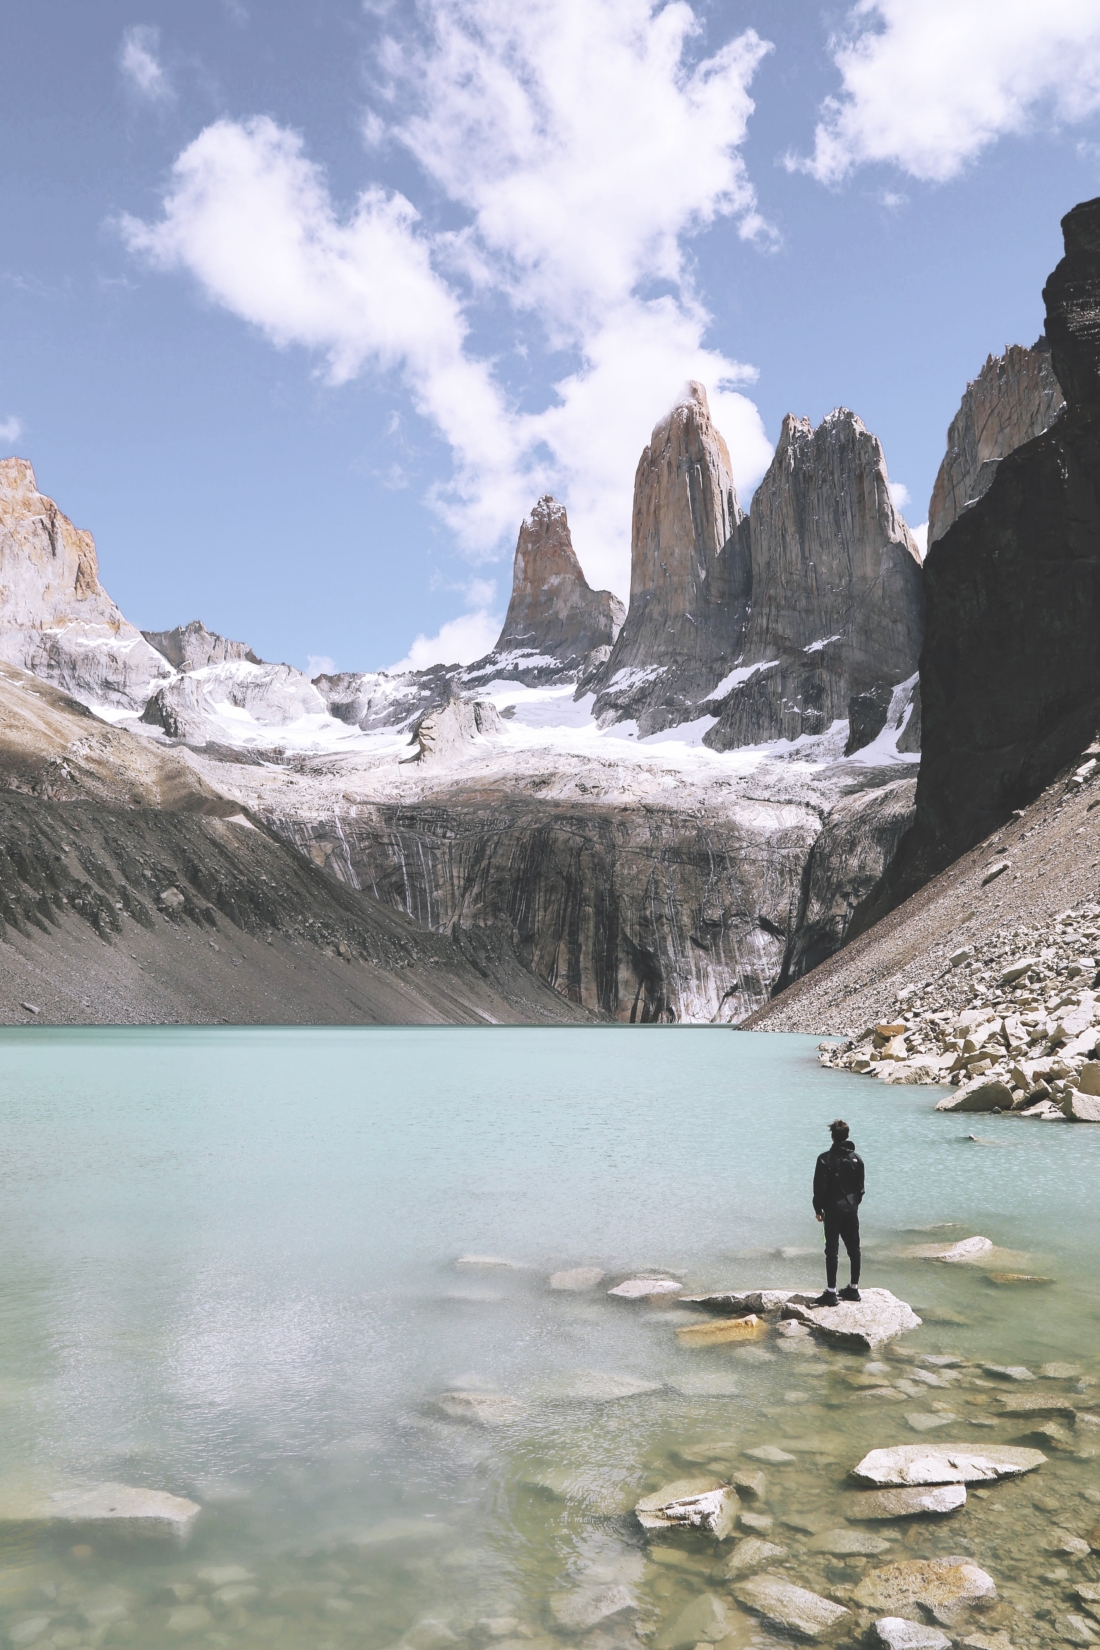 A photograph of Torres del Paine (three granite towers), with a hiker and the lagoon in the foreground